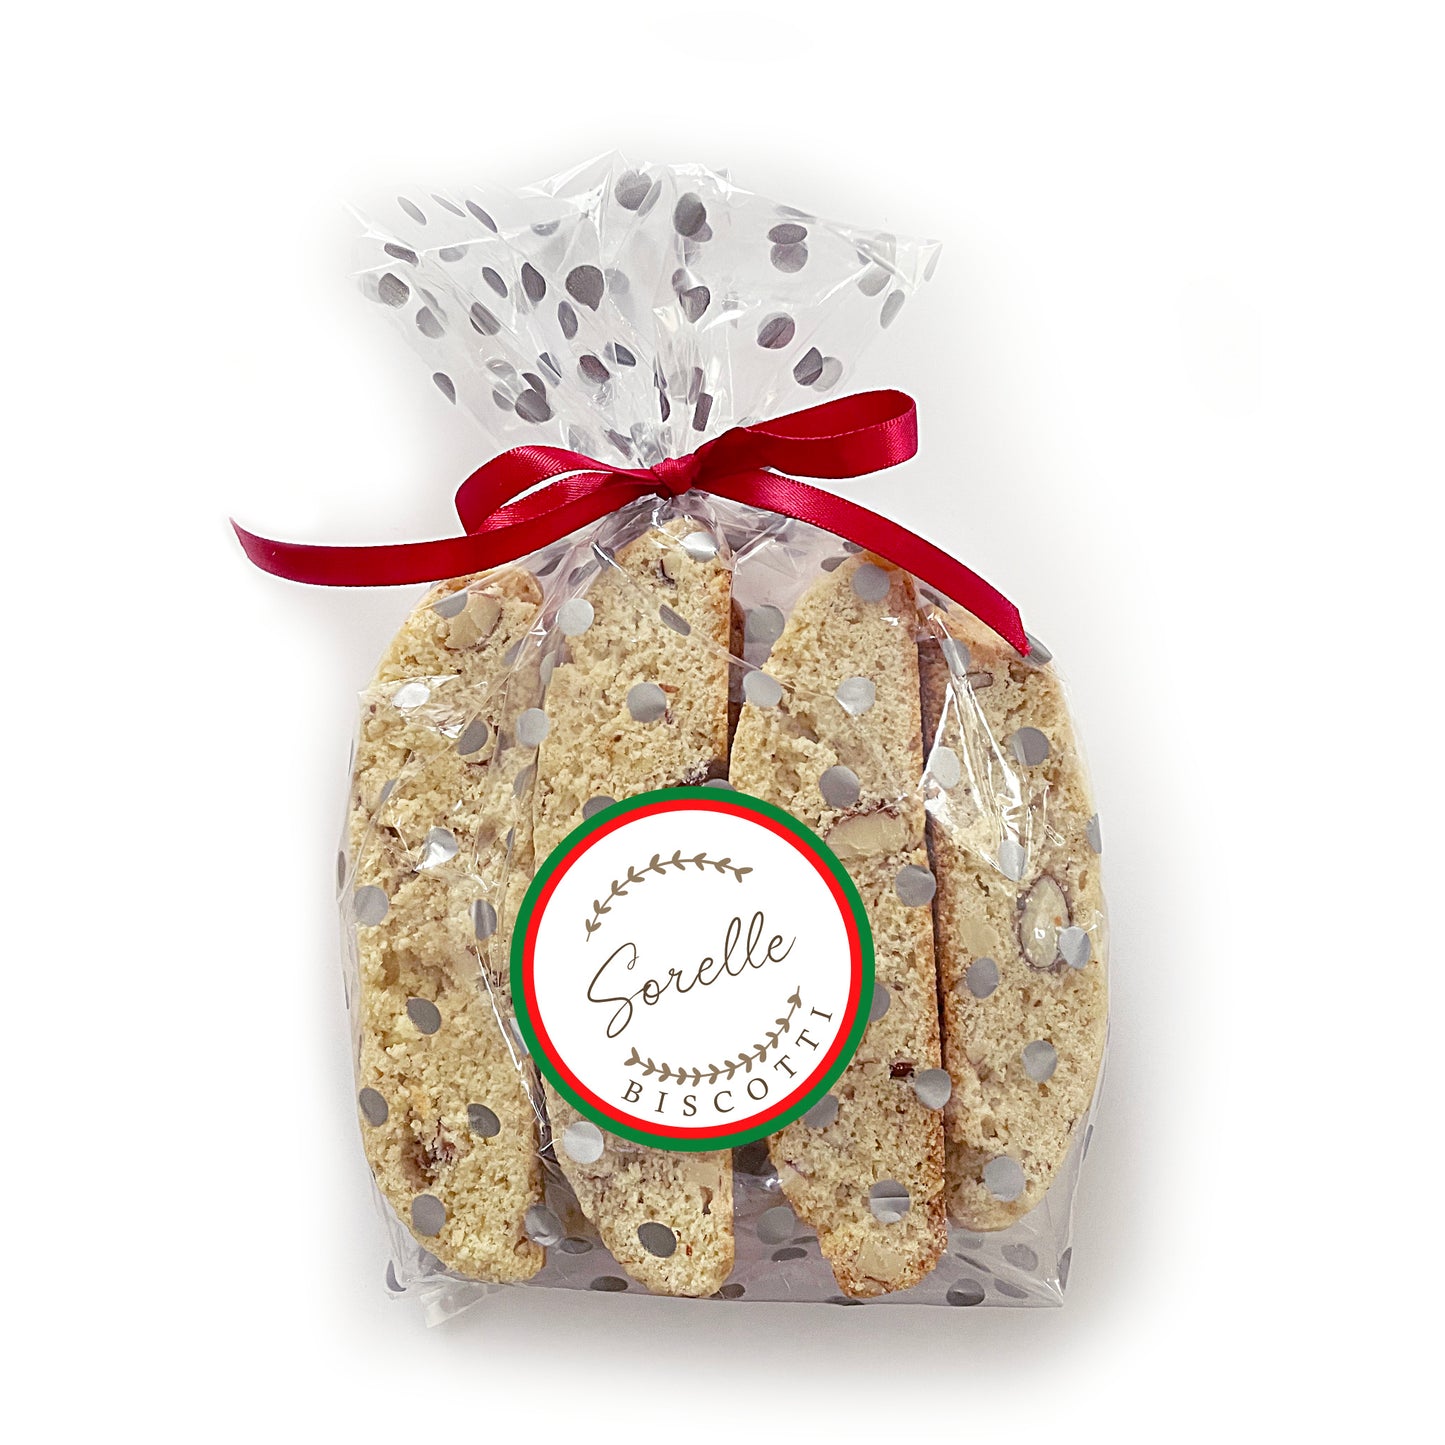 Sorelle Biscotti LLC 8 pack Beta's traditional anise almond biscotti cookies